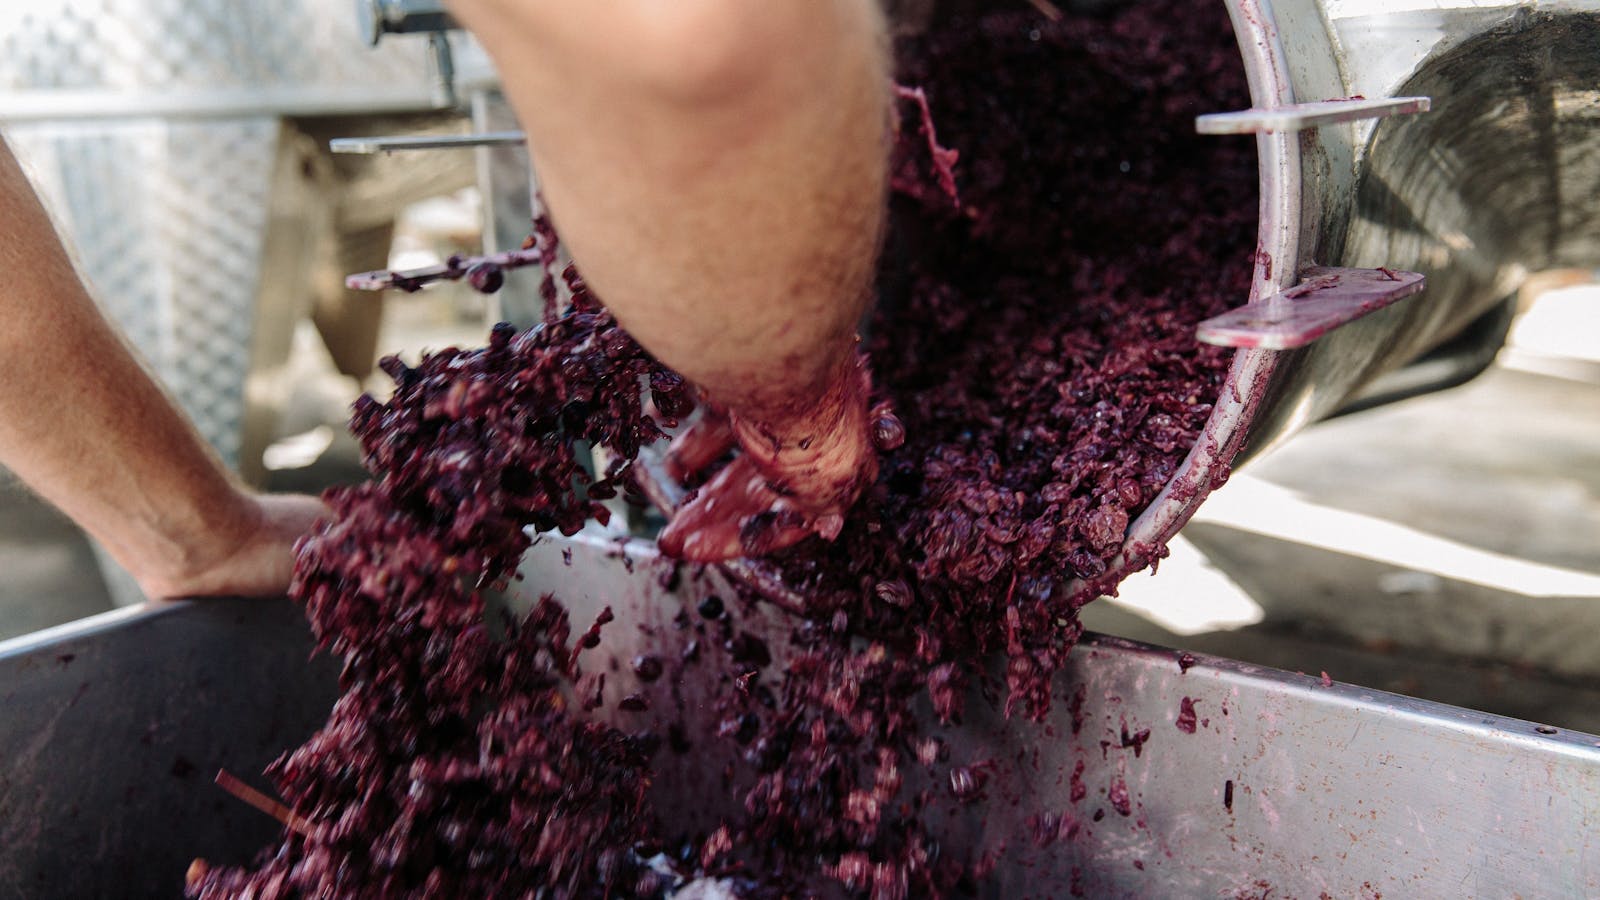 More Winemaking action at Witches Falls